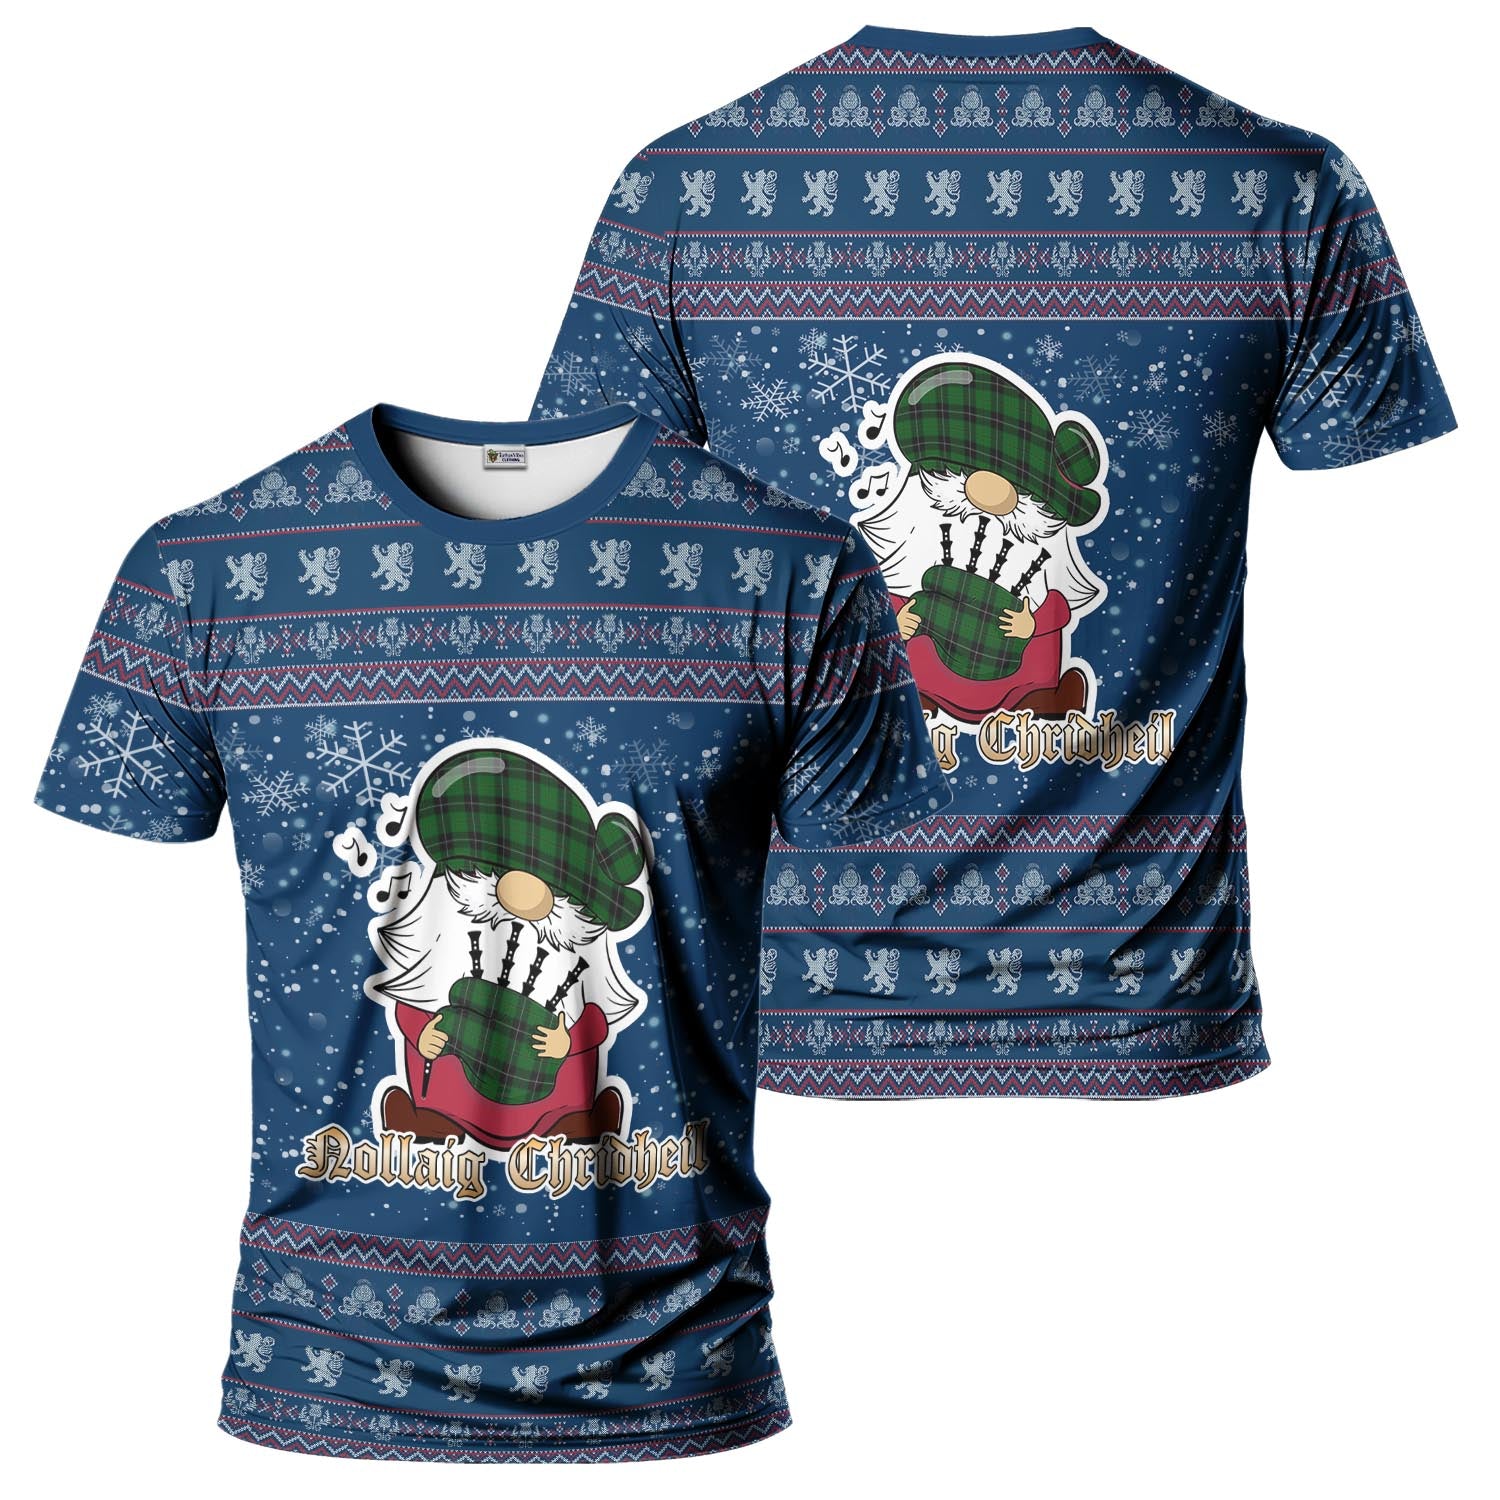 Raeside Clan Christmas Family T-Shirt with Funny Gnome Playing Bagpipes Kid's Shirt Blue - Tartanvibesclothing